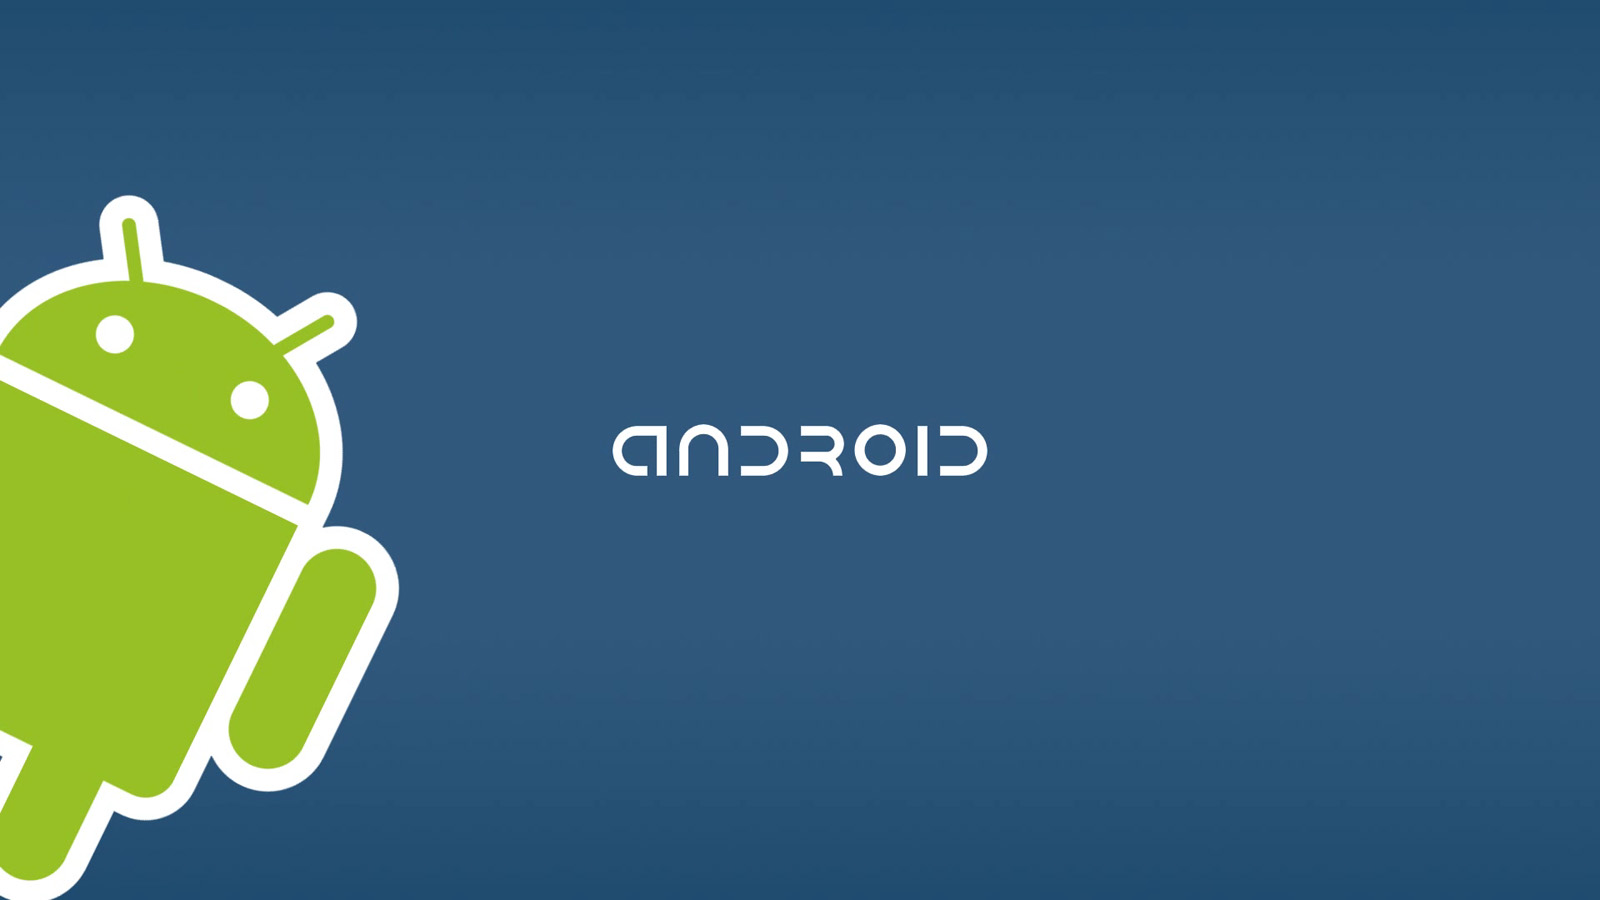 Android Os Background